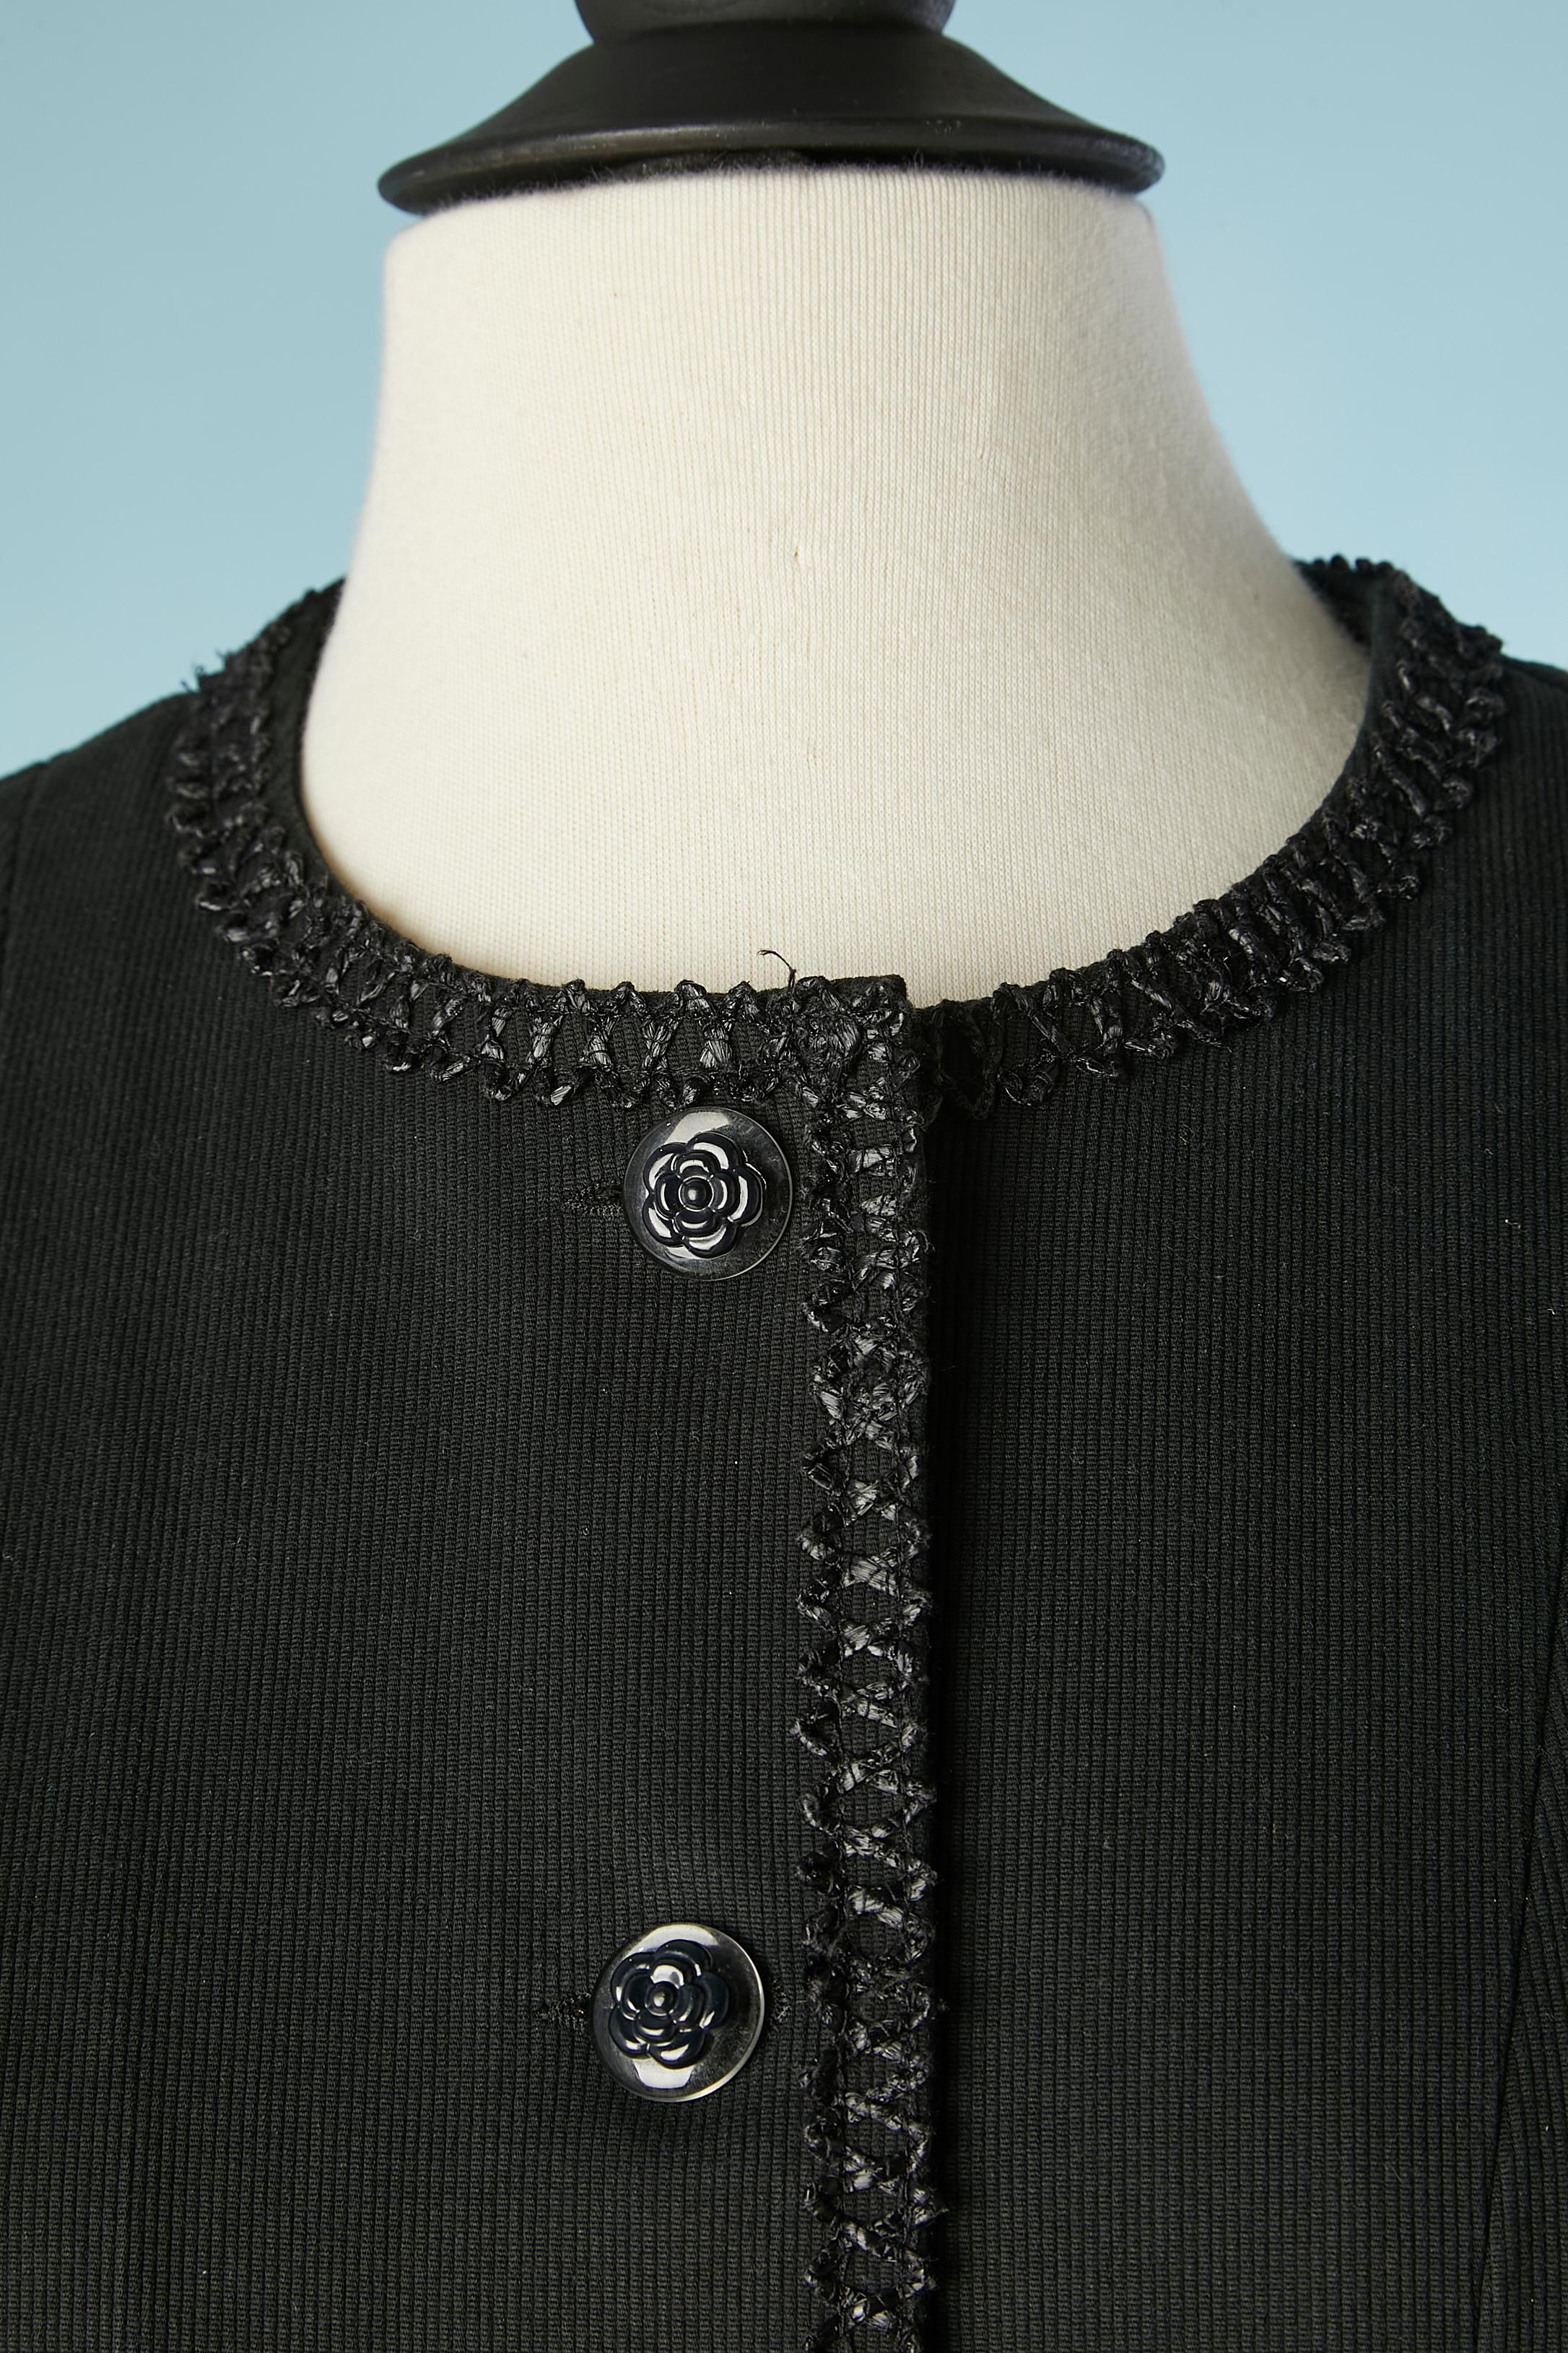 Black cotton skirt-suit with raffia edge and camelia's buttons. No lining but piping inside.
SIZE M